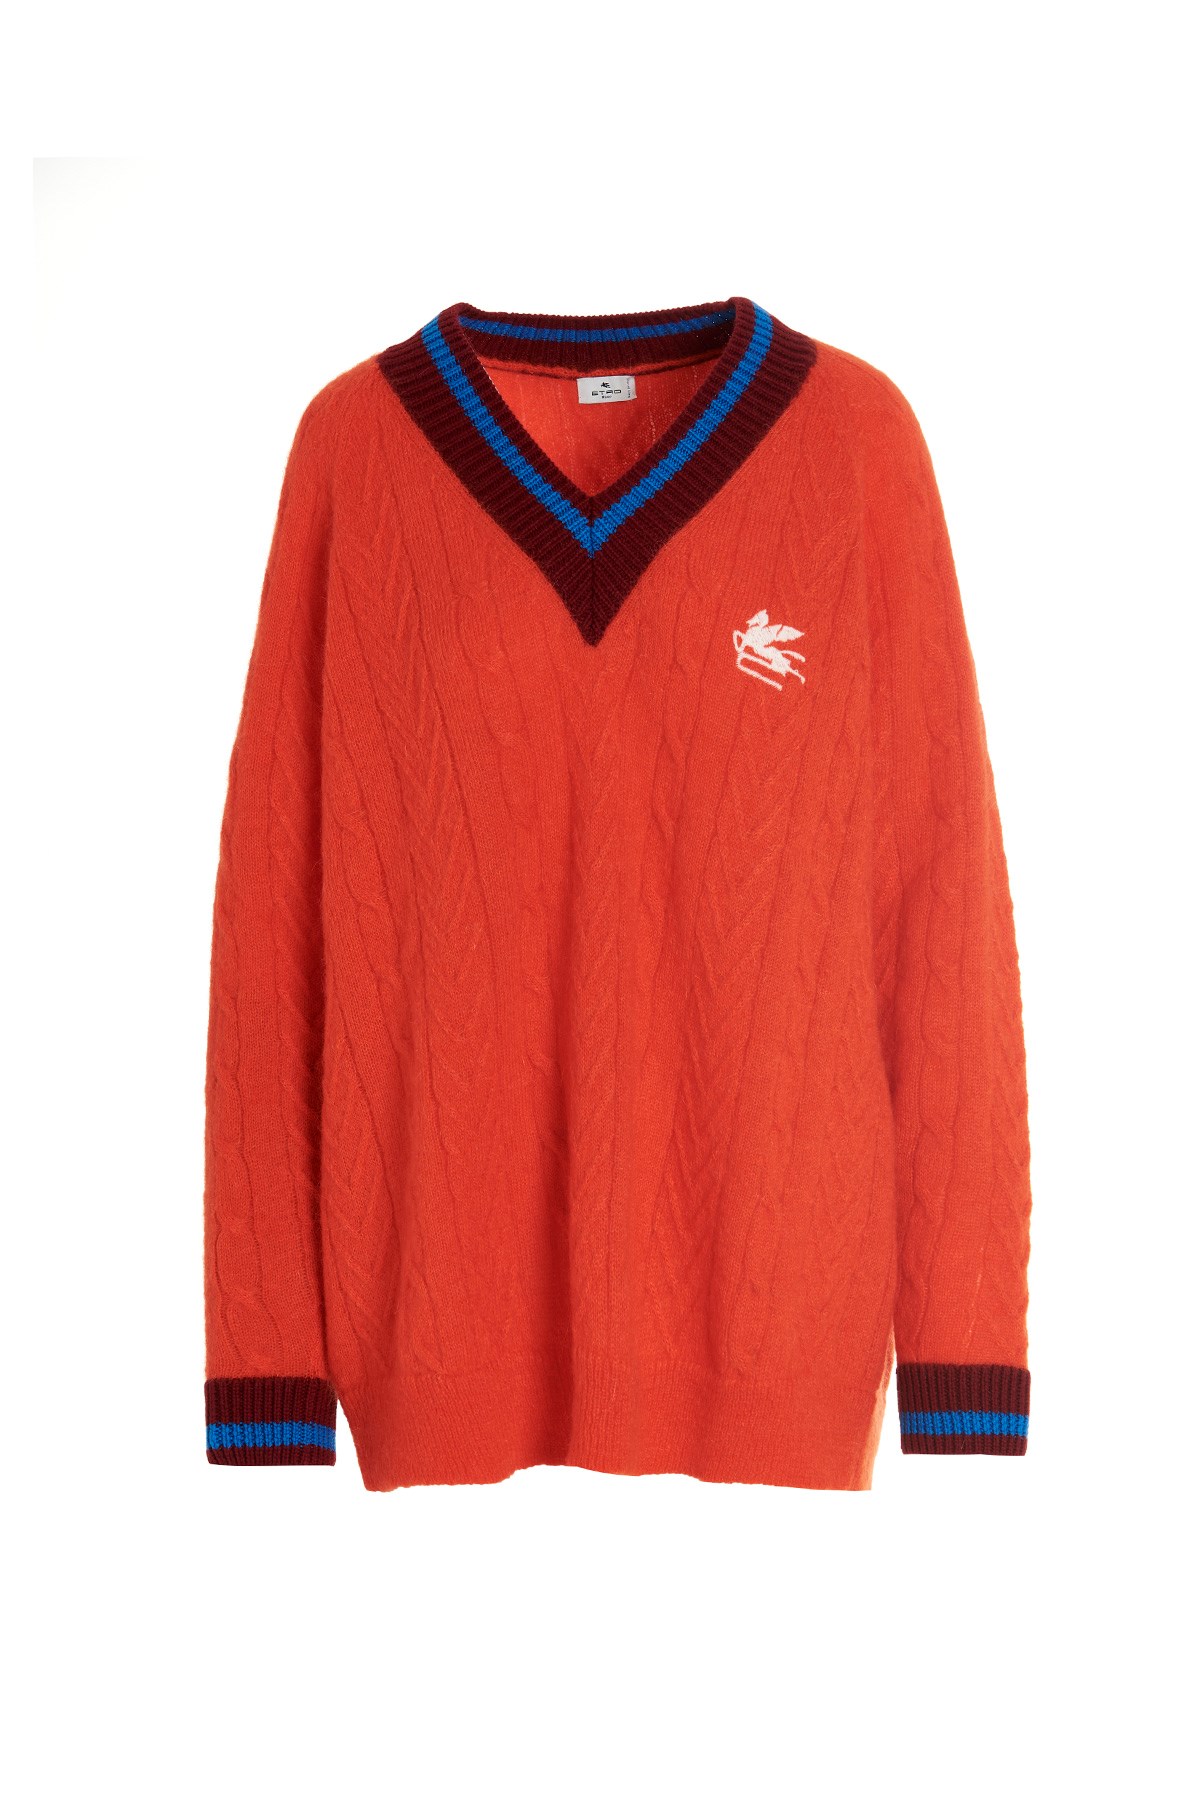 ETRO 'Red Special’ Sweater